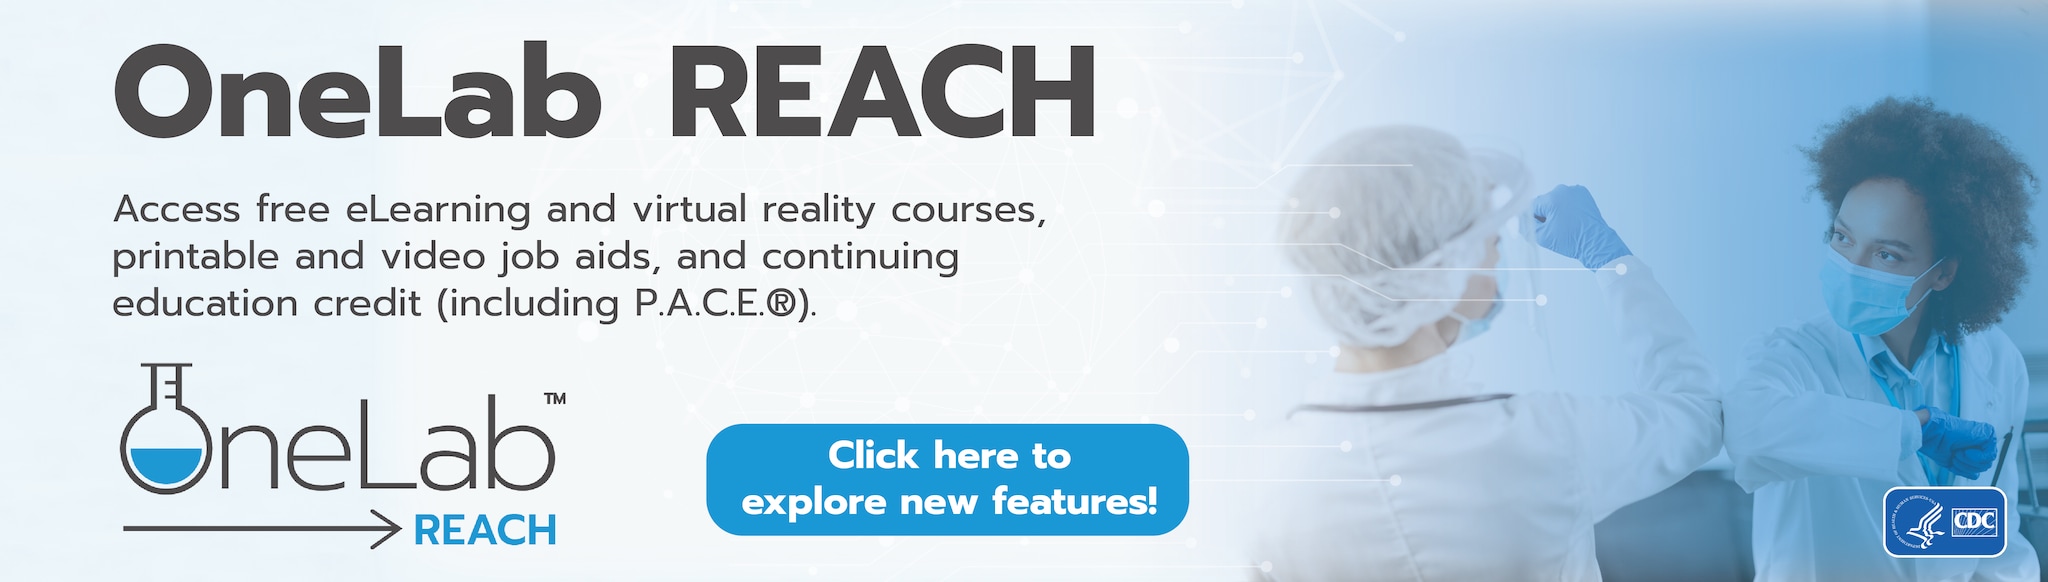 Banner image advertising the new OneLab REACH system with man holding pen & notepad and OneLab logo.